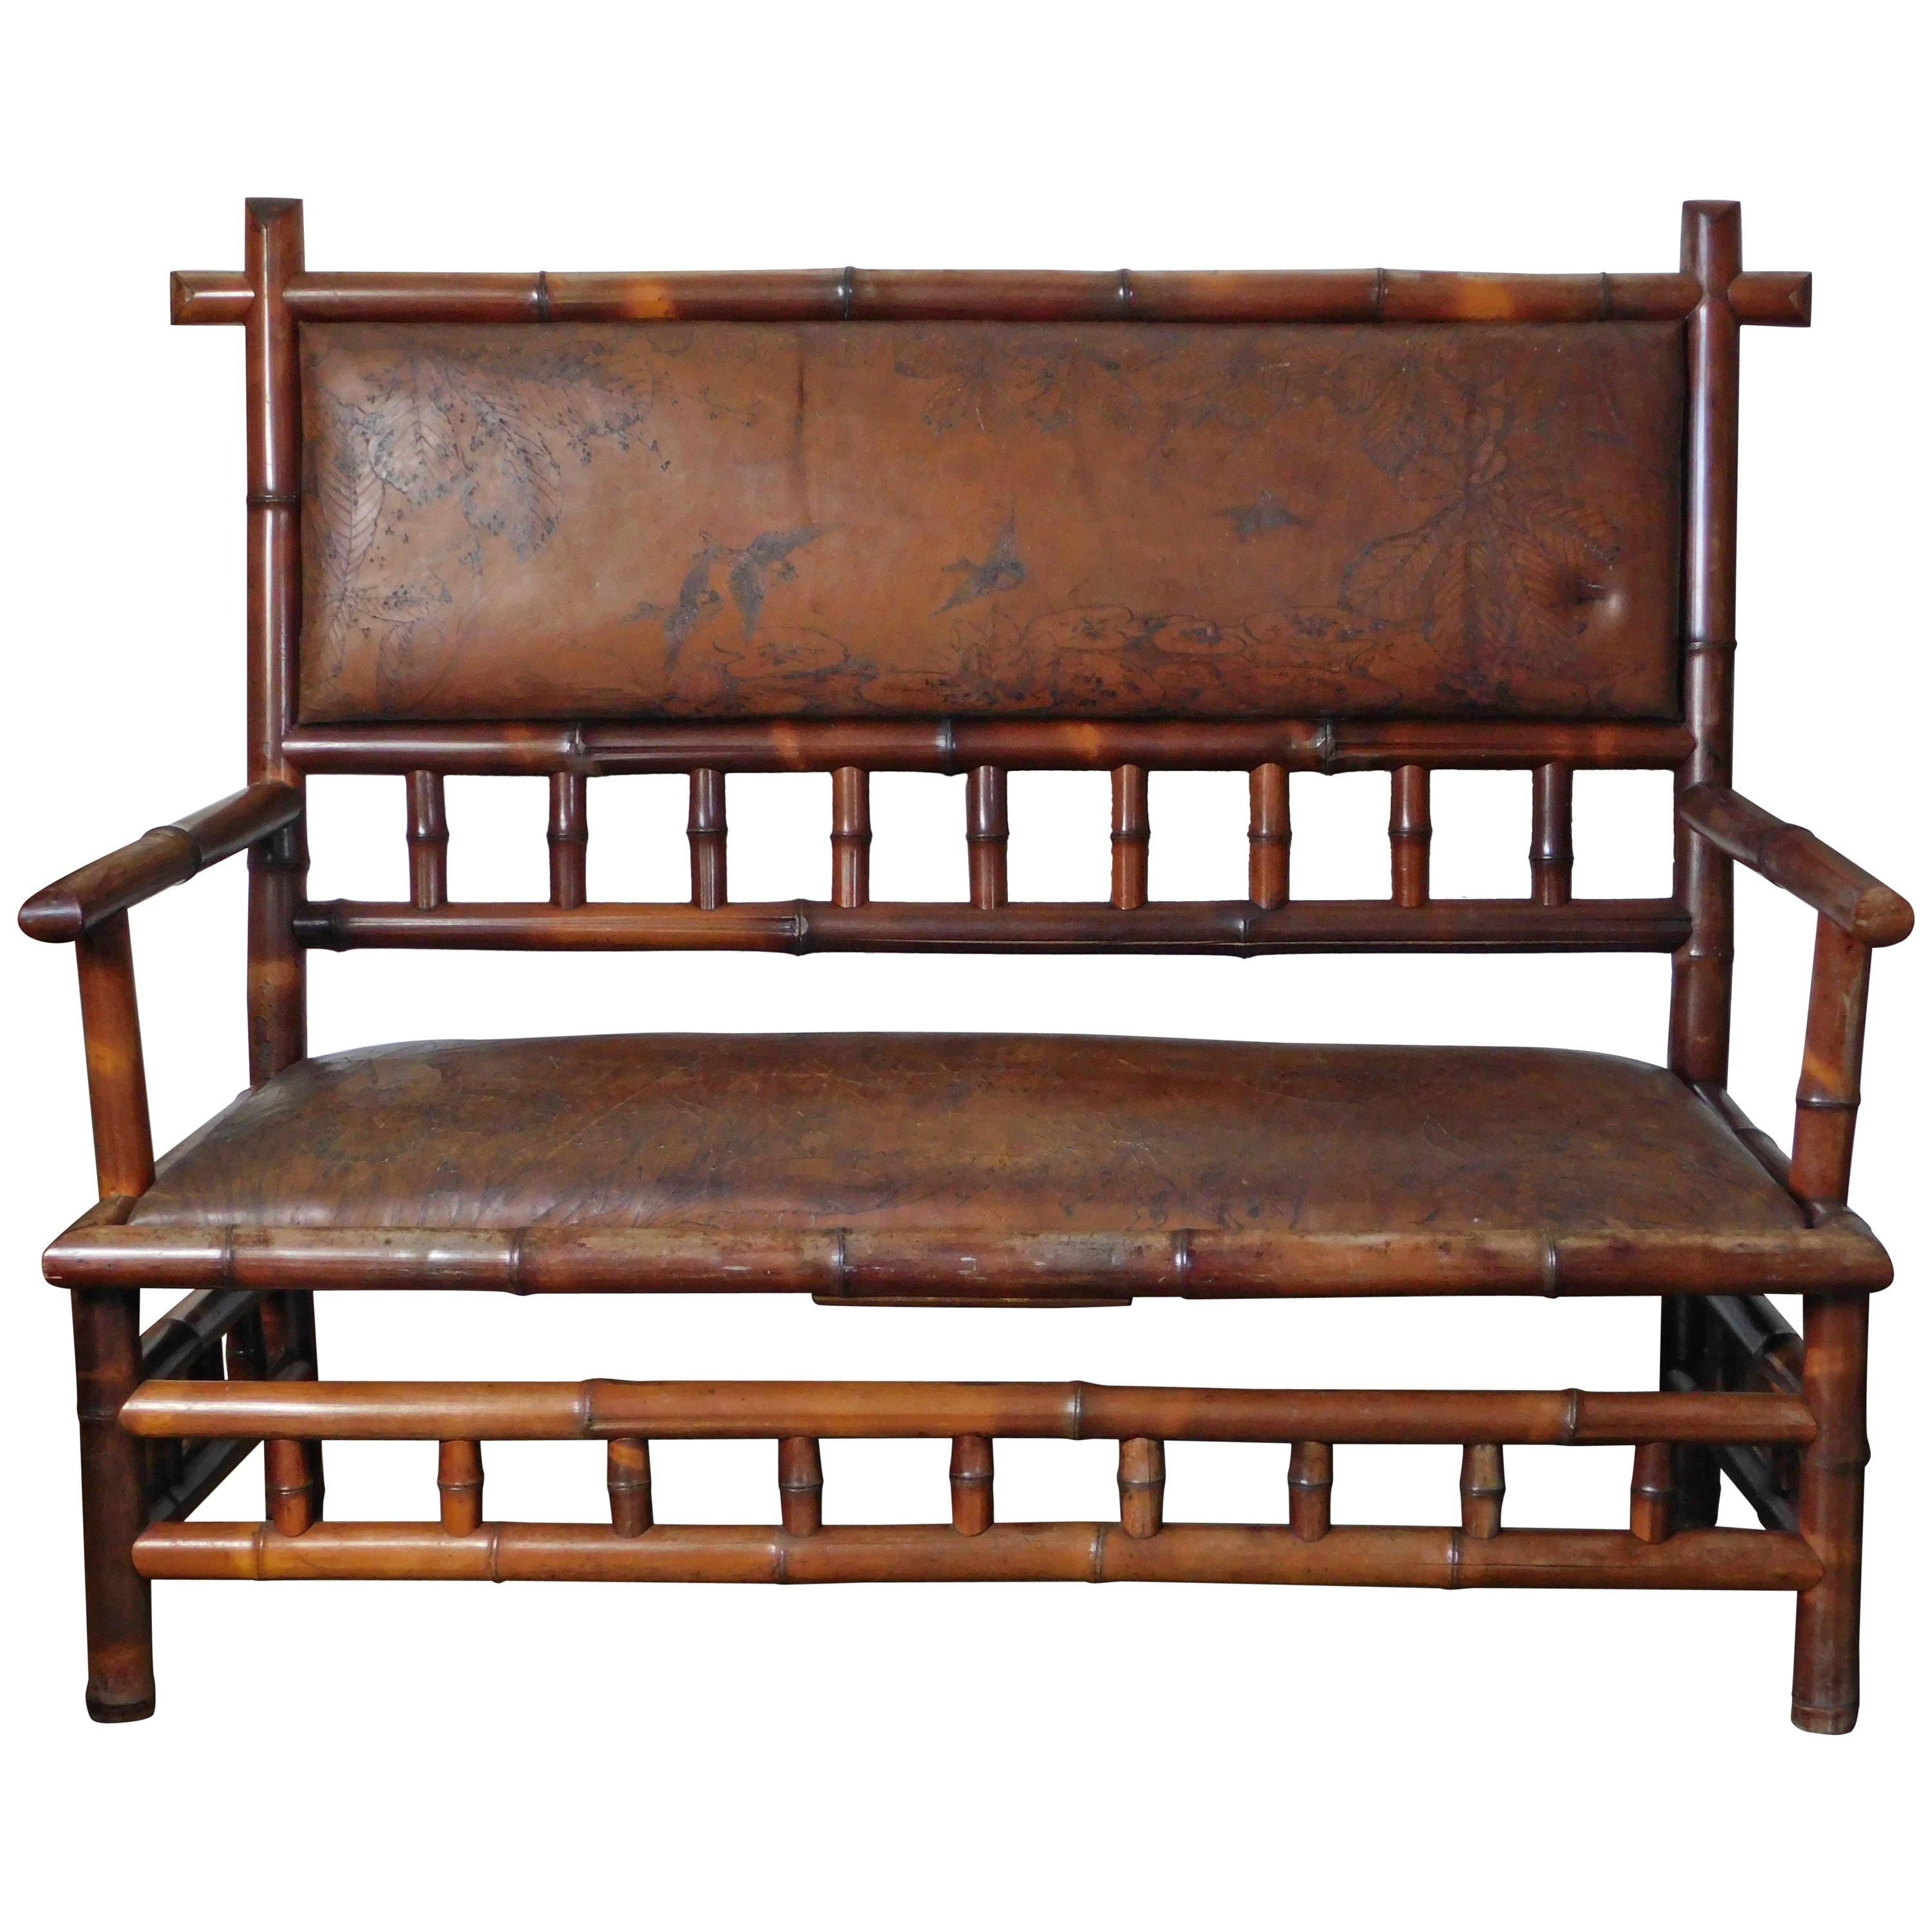 19th Century Perret Vibert Bamboo Settee with Decorated Leather Upholstery For Sale